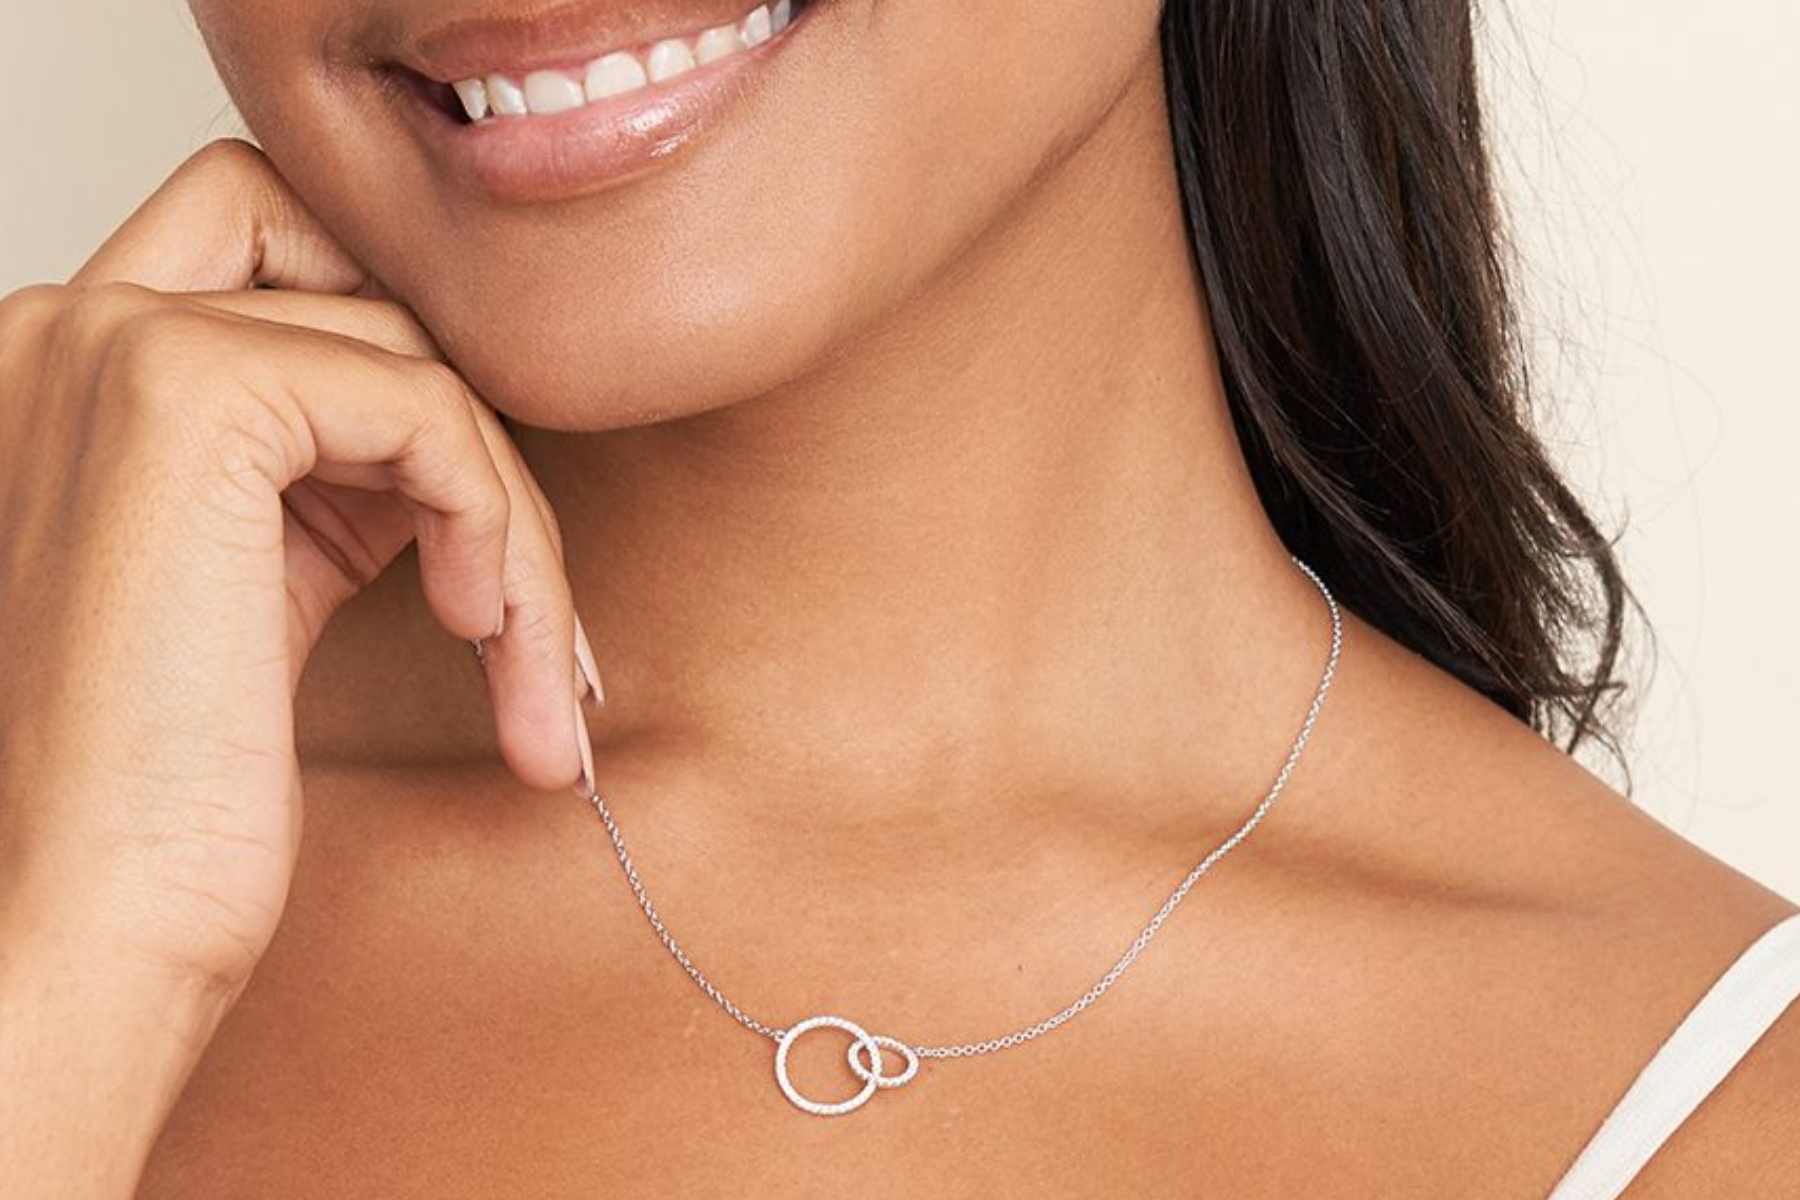 Minimalist Silver Jewelry - An Elegant And Timeless Choice